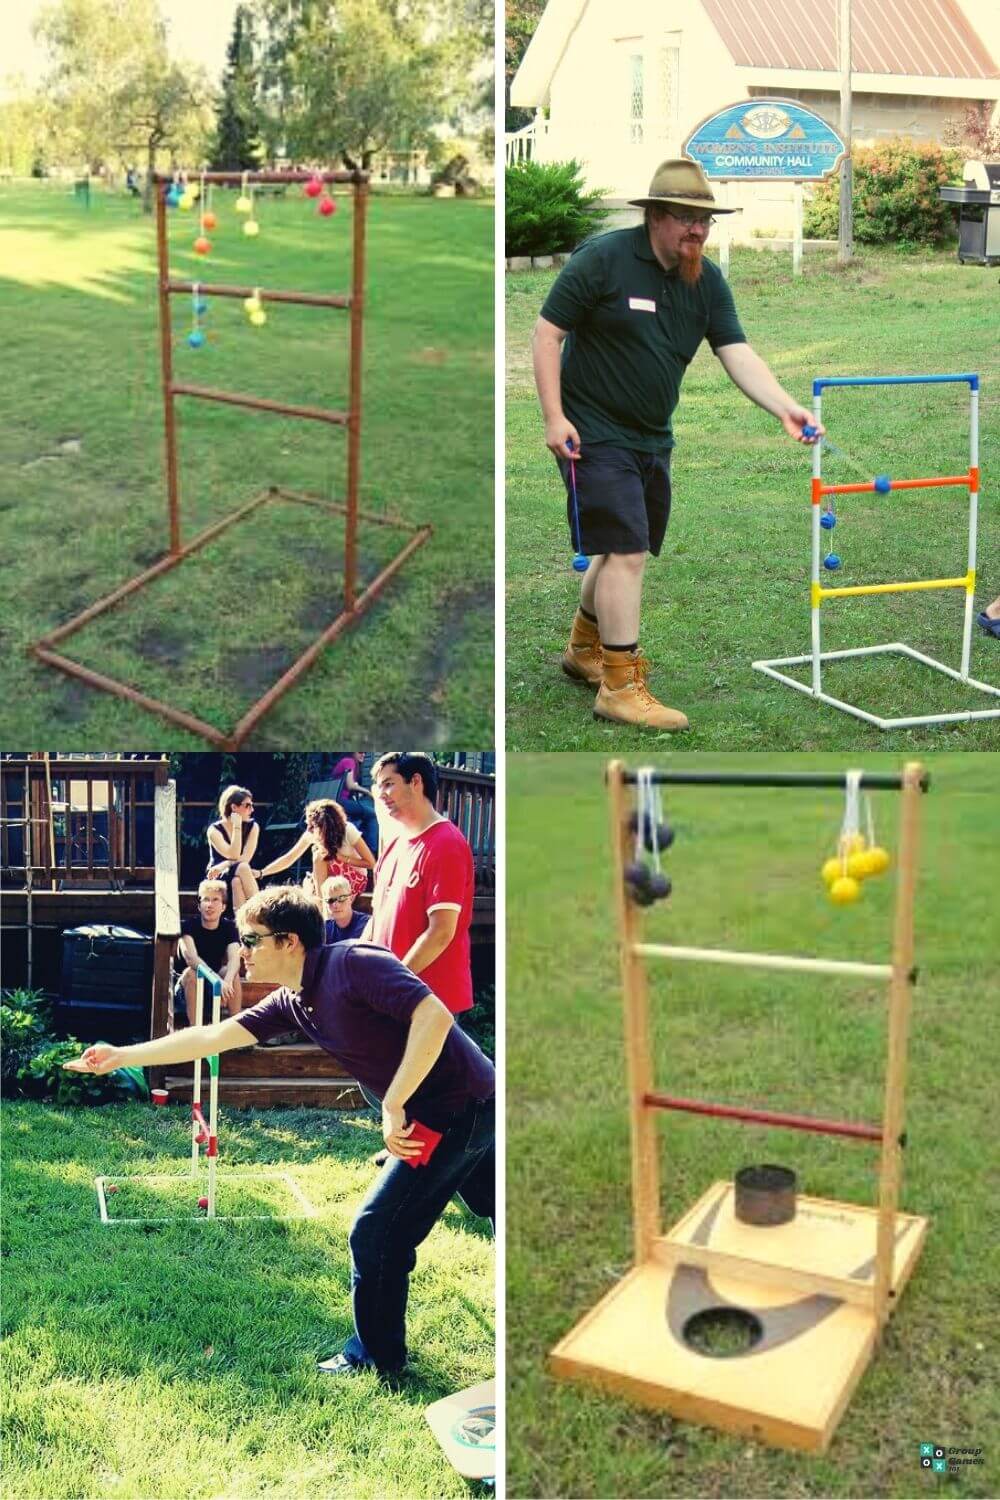 Ladder Ball Rules How to Play Ladder Ball (Official Rules)